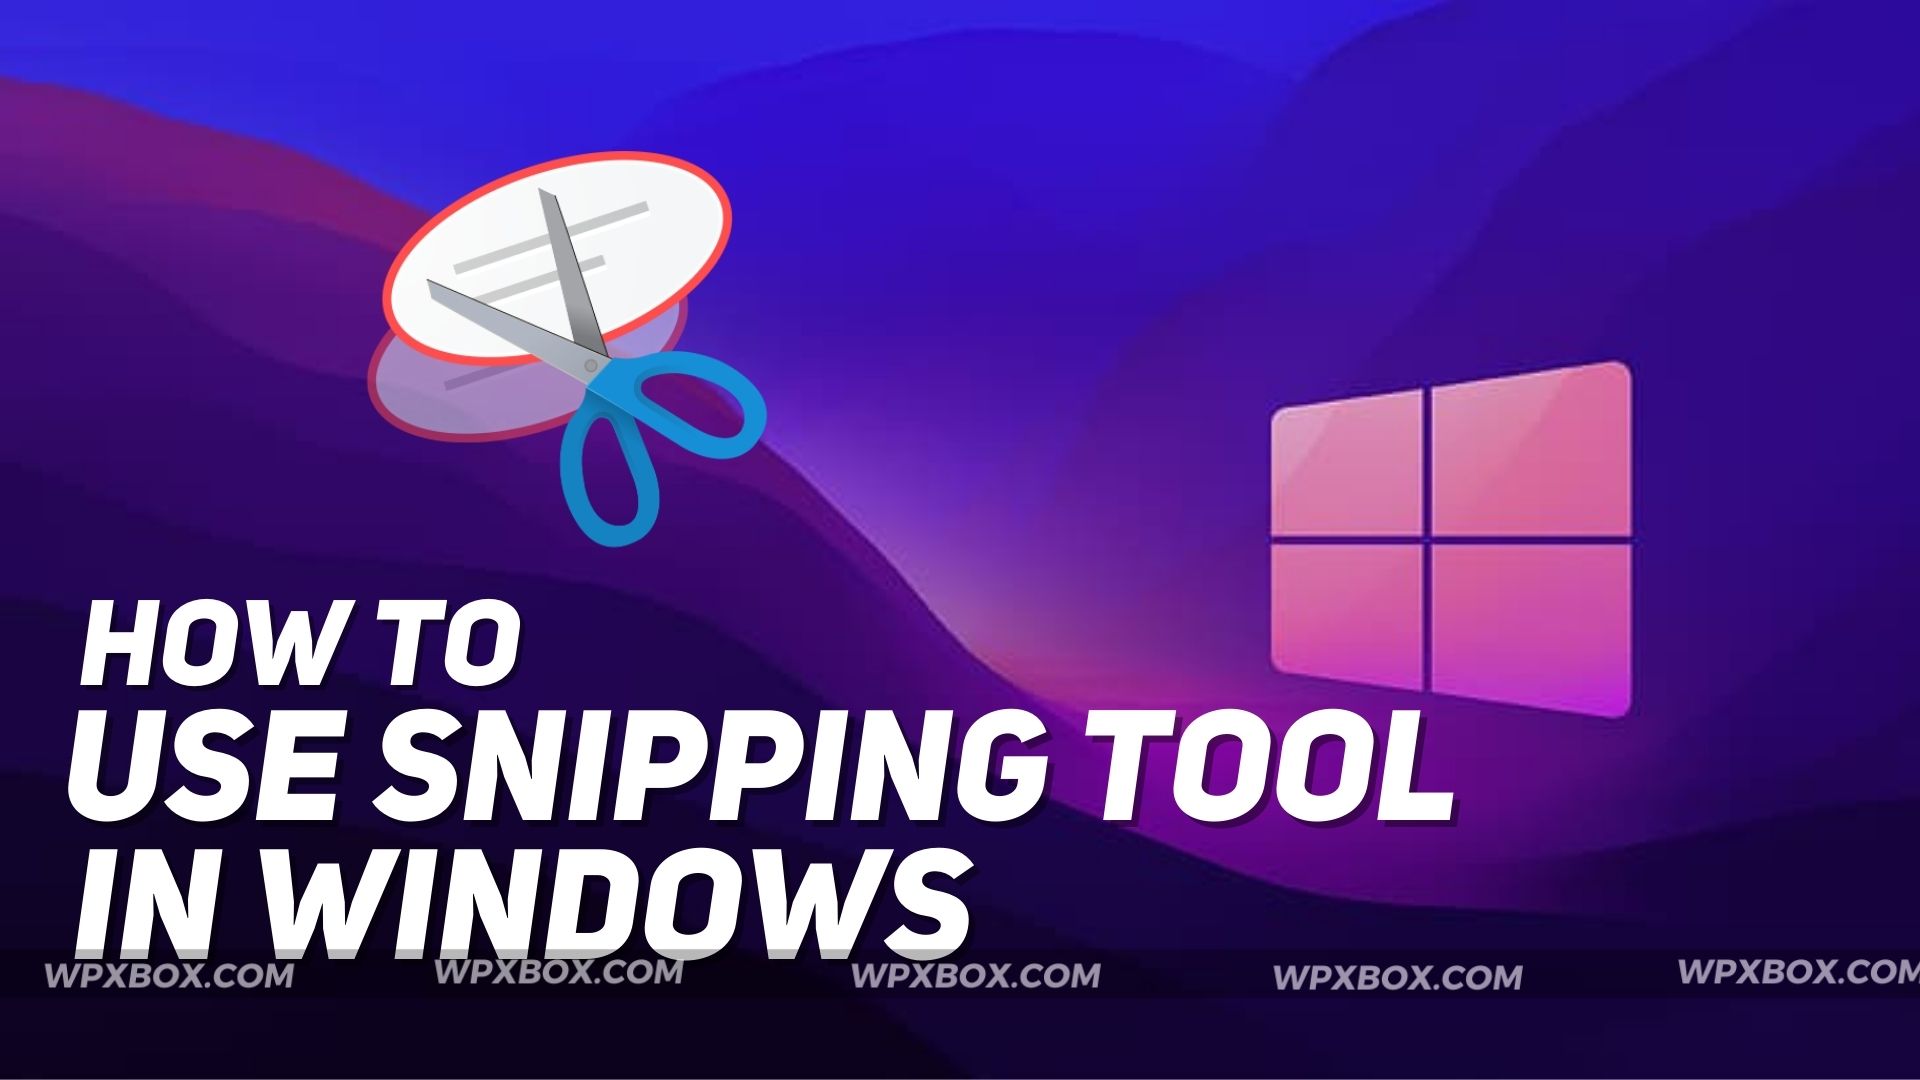 Guide How To Use The Snipping Tool In Windows